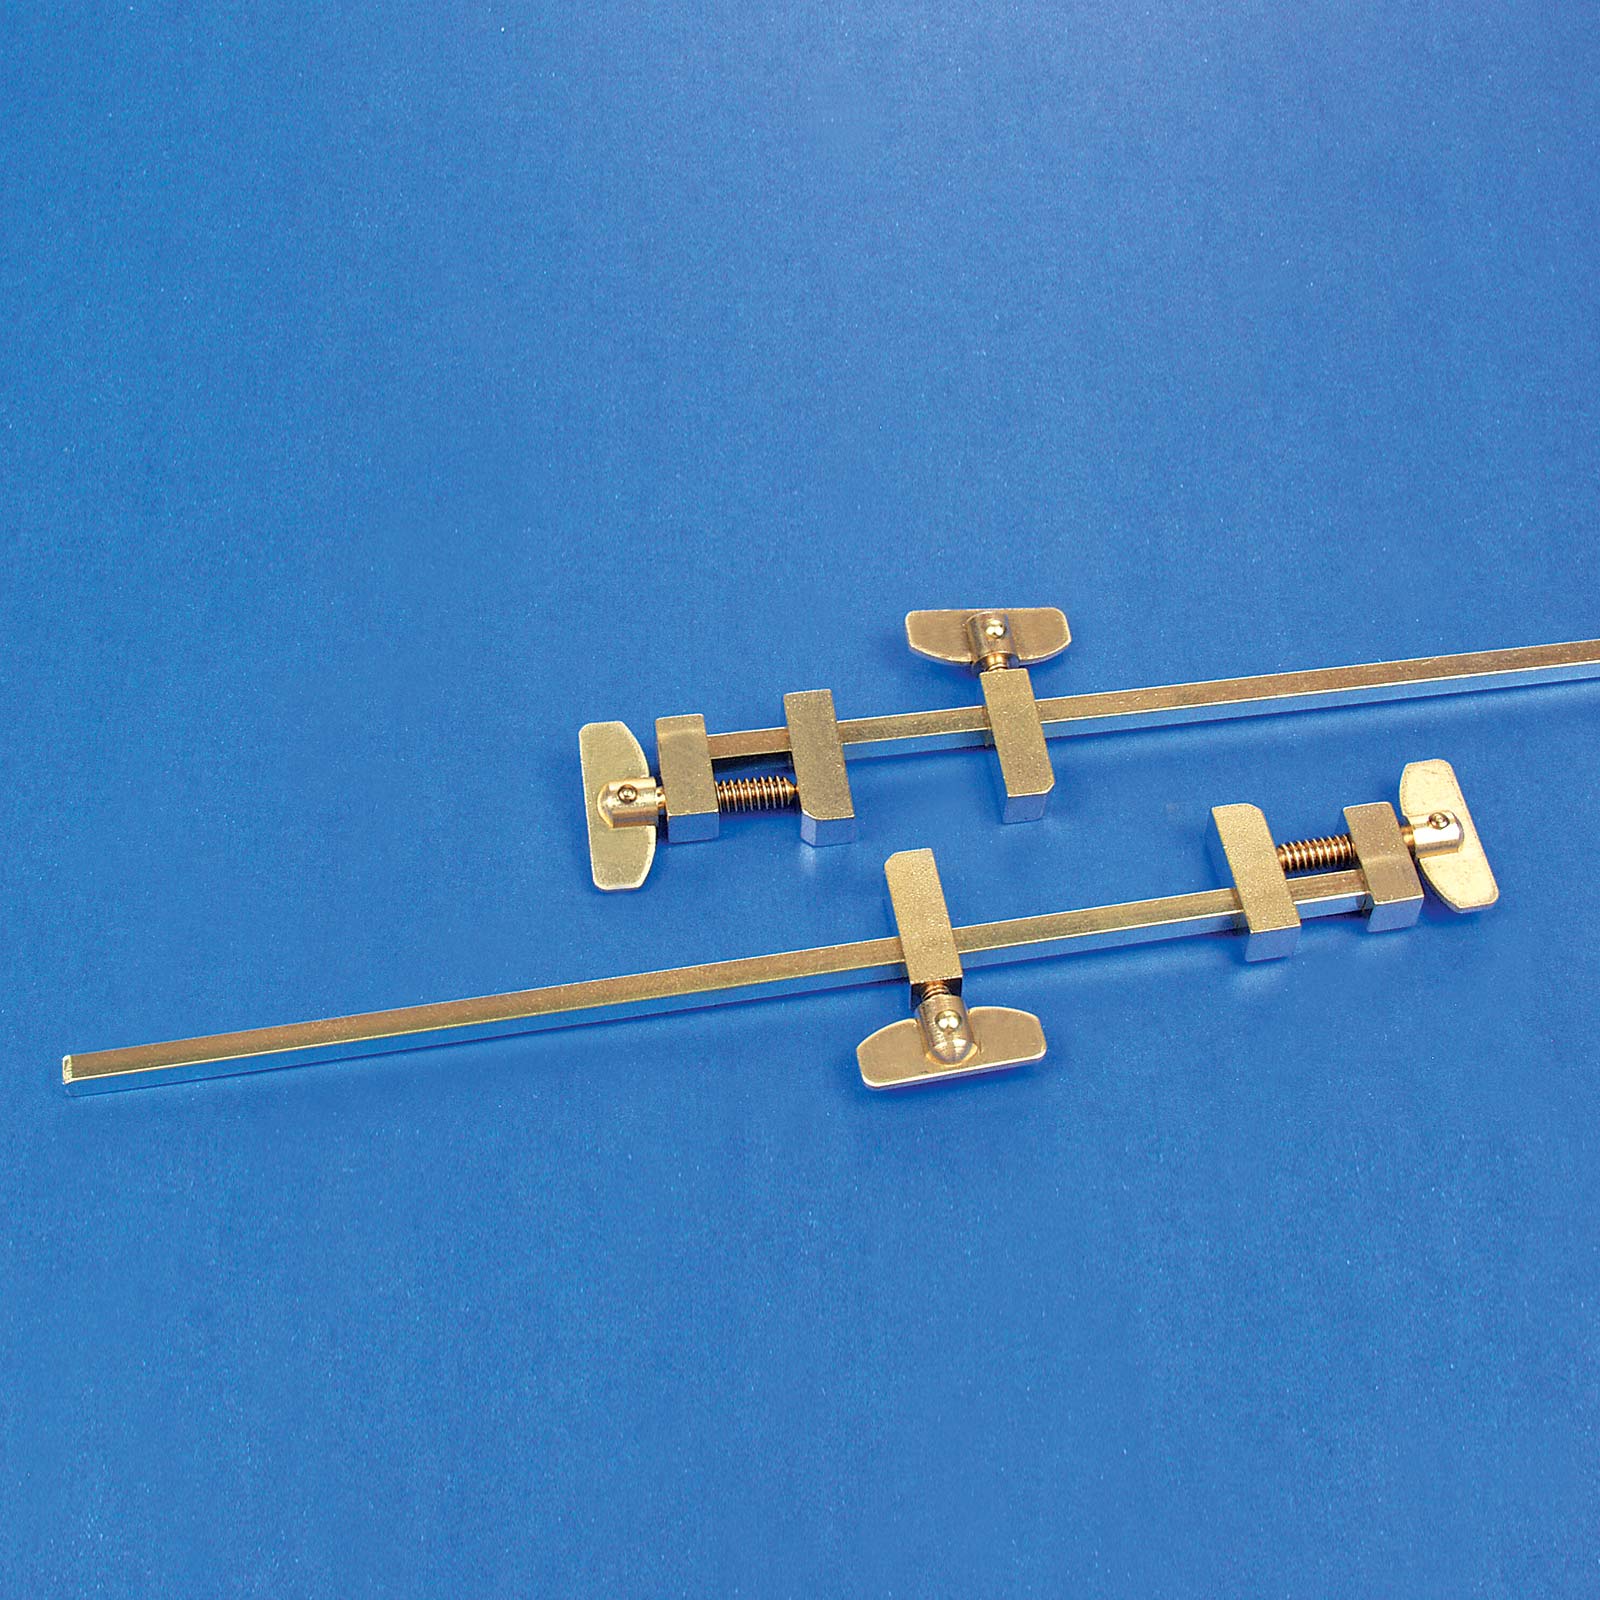 Solid Brass Miniature Bar Clamps, 7 Inches Long (Set of 2) - Micro - Mark Tool Clamps & Vises